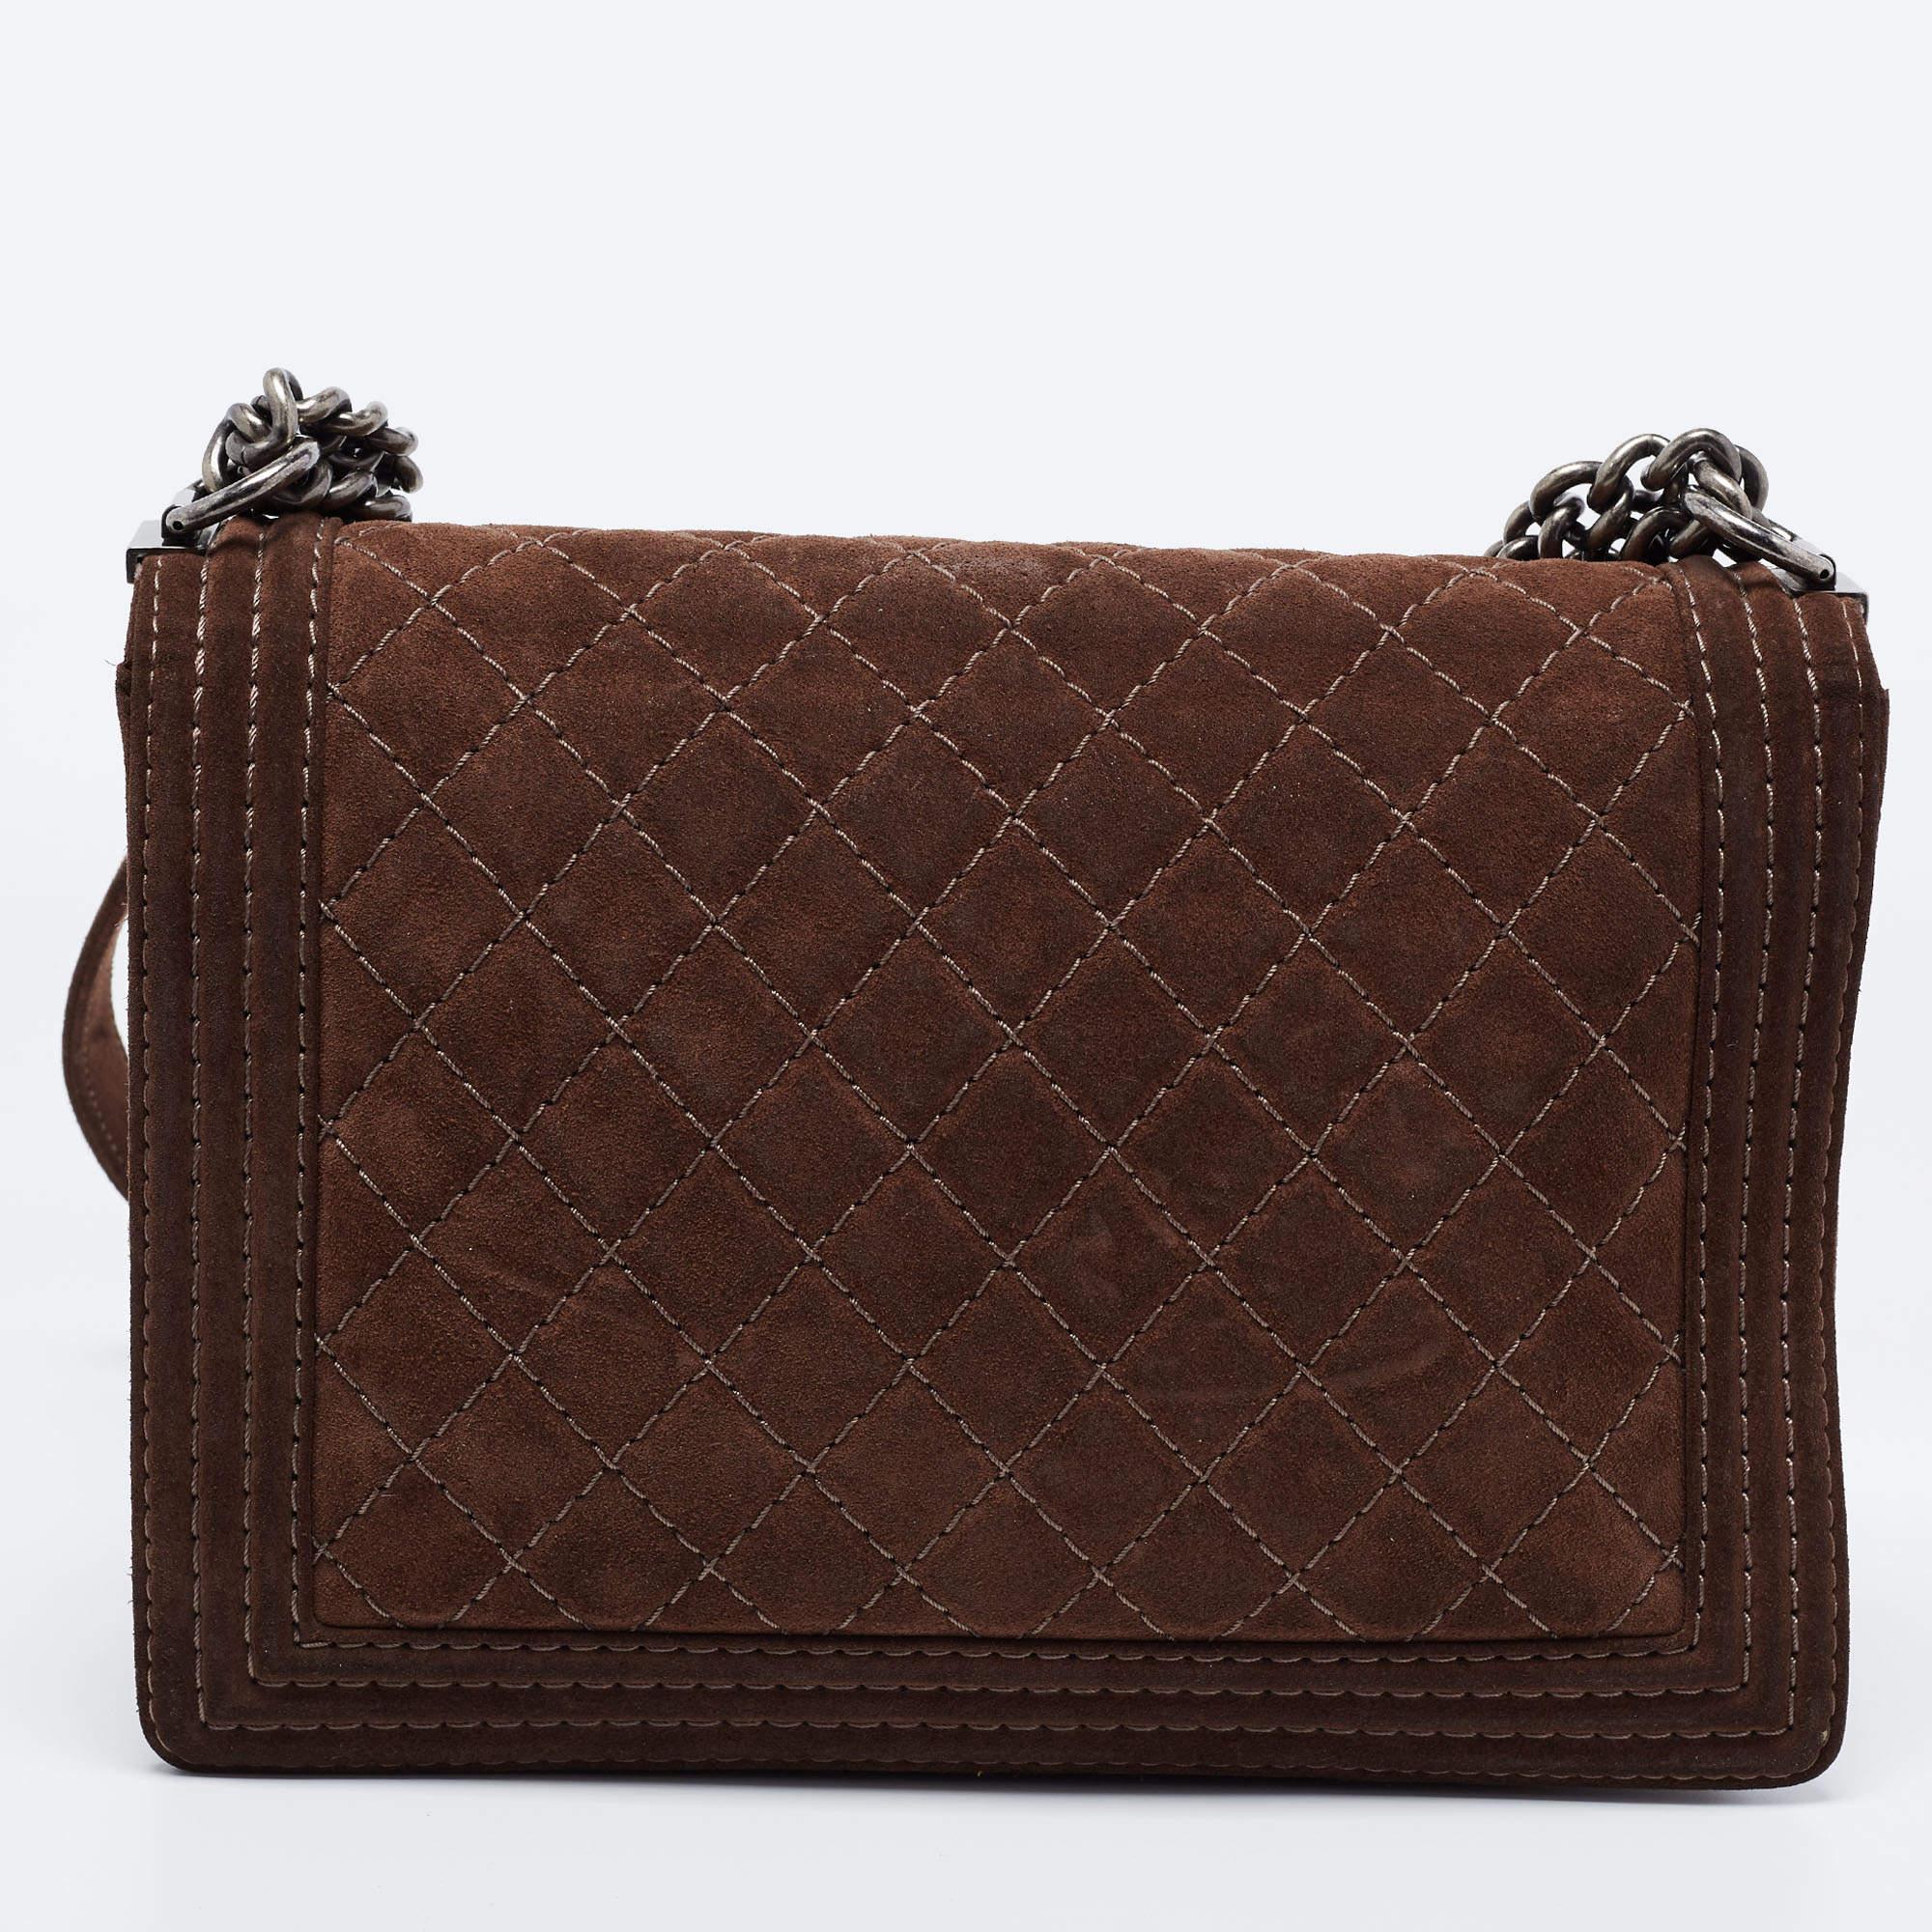 Introduced as a part of the Chanel Fall/Winter collection of 2011, the Boy bag embodies an alluring appeal and is complemented with exquisite details. This brown creation is meticulously crafted from quilted suede with side panelling and features a